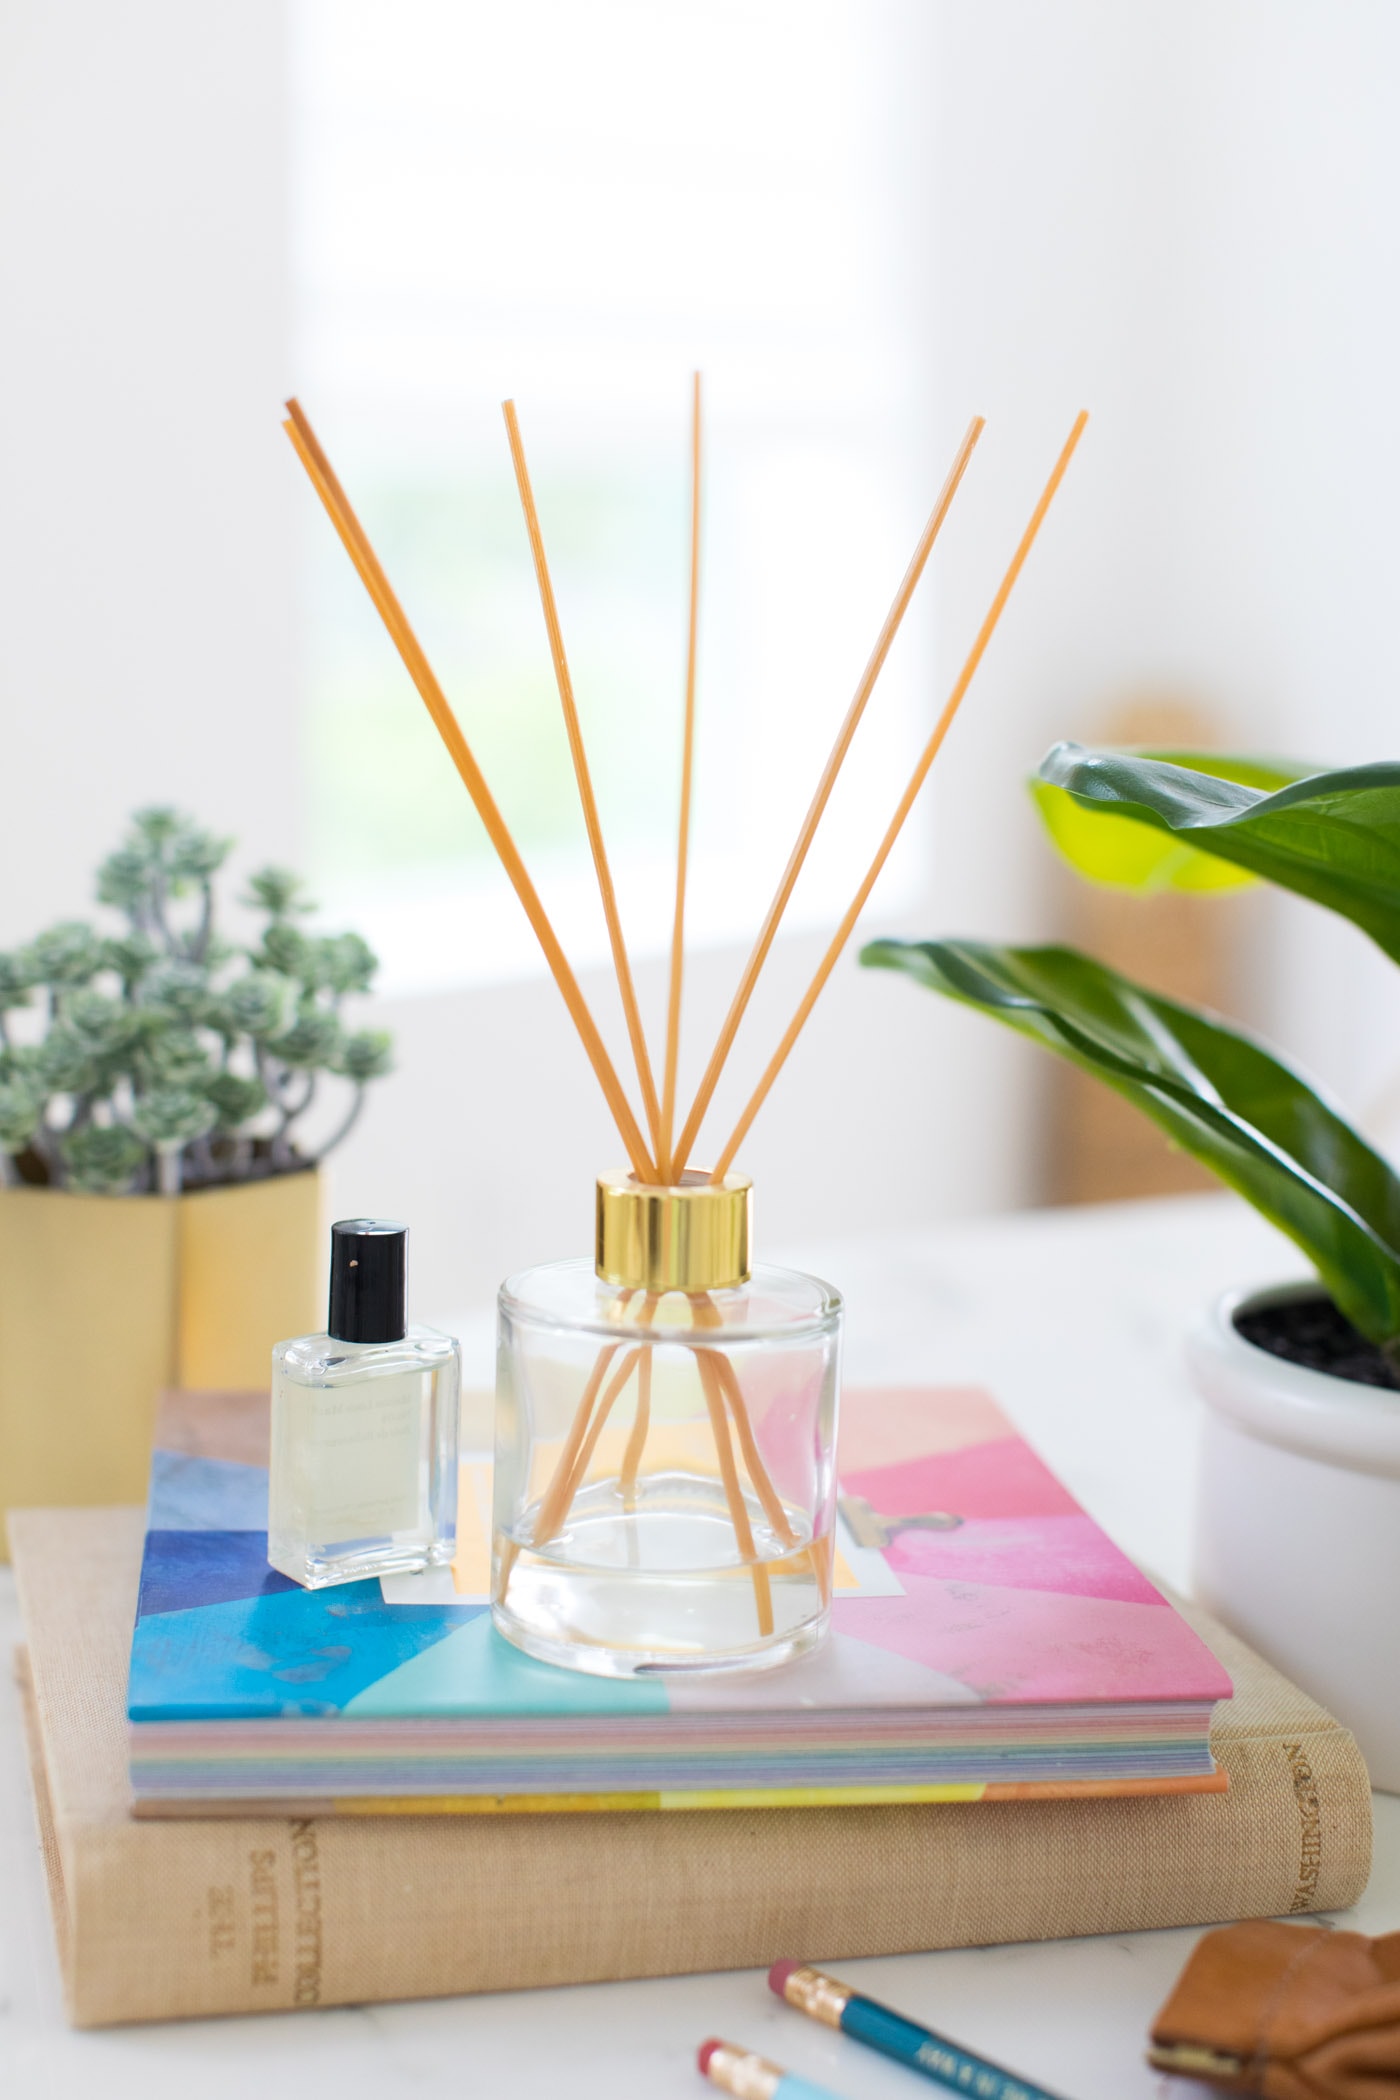 photo of a diy essential oil diffuser with reeds